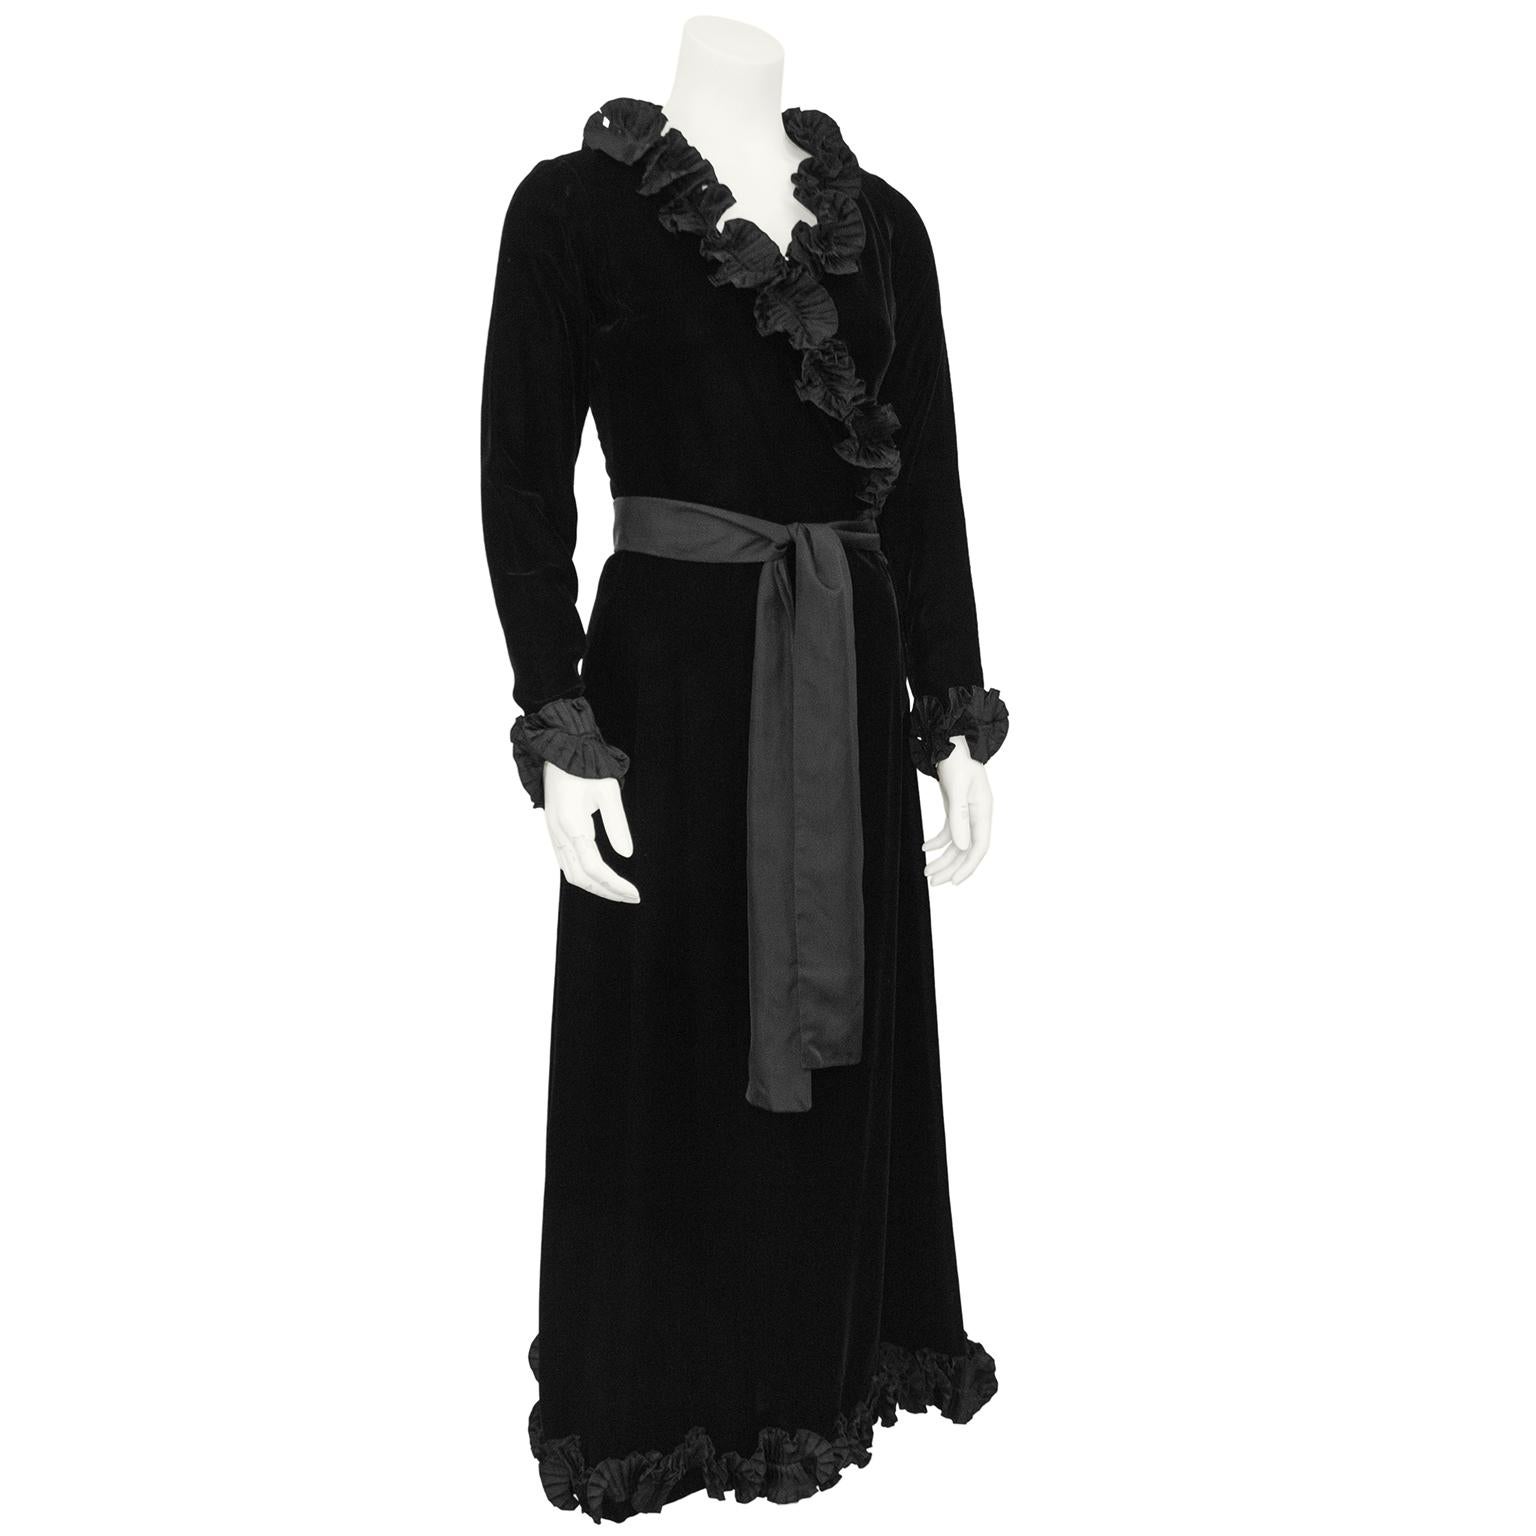 Absolutely breathtaking Yves Saint Laurent Rive Gauche wrap style maxi evening dress from the 1970s. Black velvet with a lovely silk taffeta textured, pleated ruffle trim at the neckline, cuffs and hem. Black silk belt ties at the waist that can be